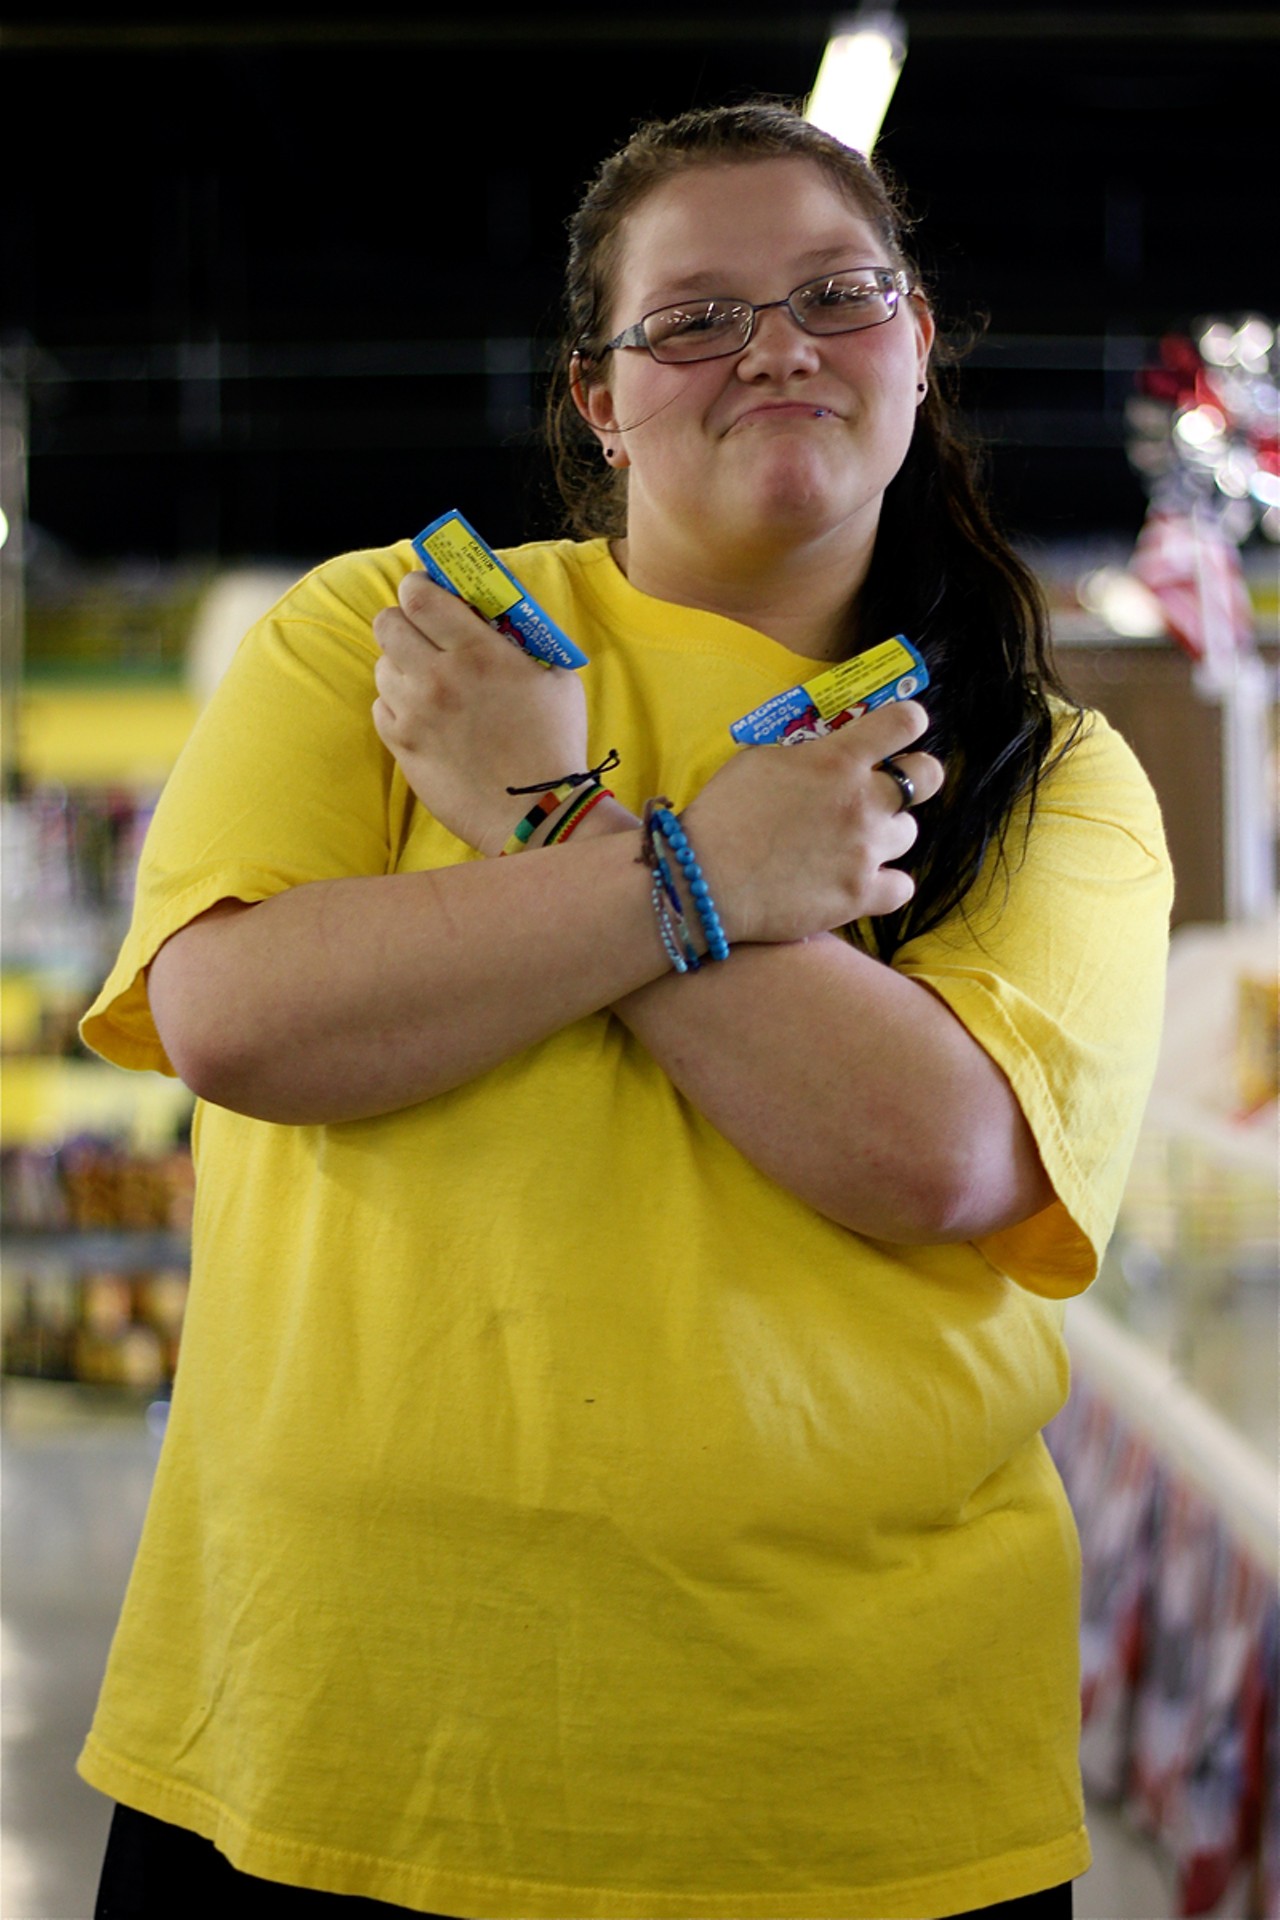 Fireworks World employee Sabrina Shinkle poses with her favorite firework, Magnum Pistol Popper. This is Shinkle's first season at Fireworks World.